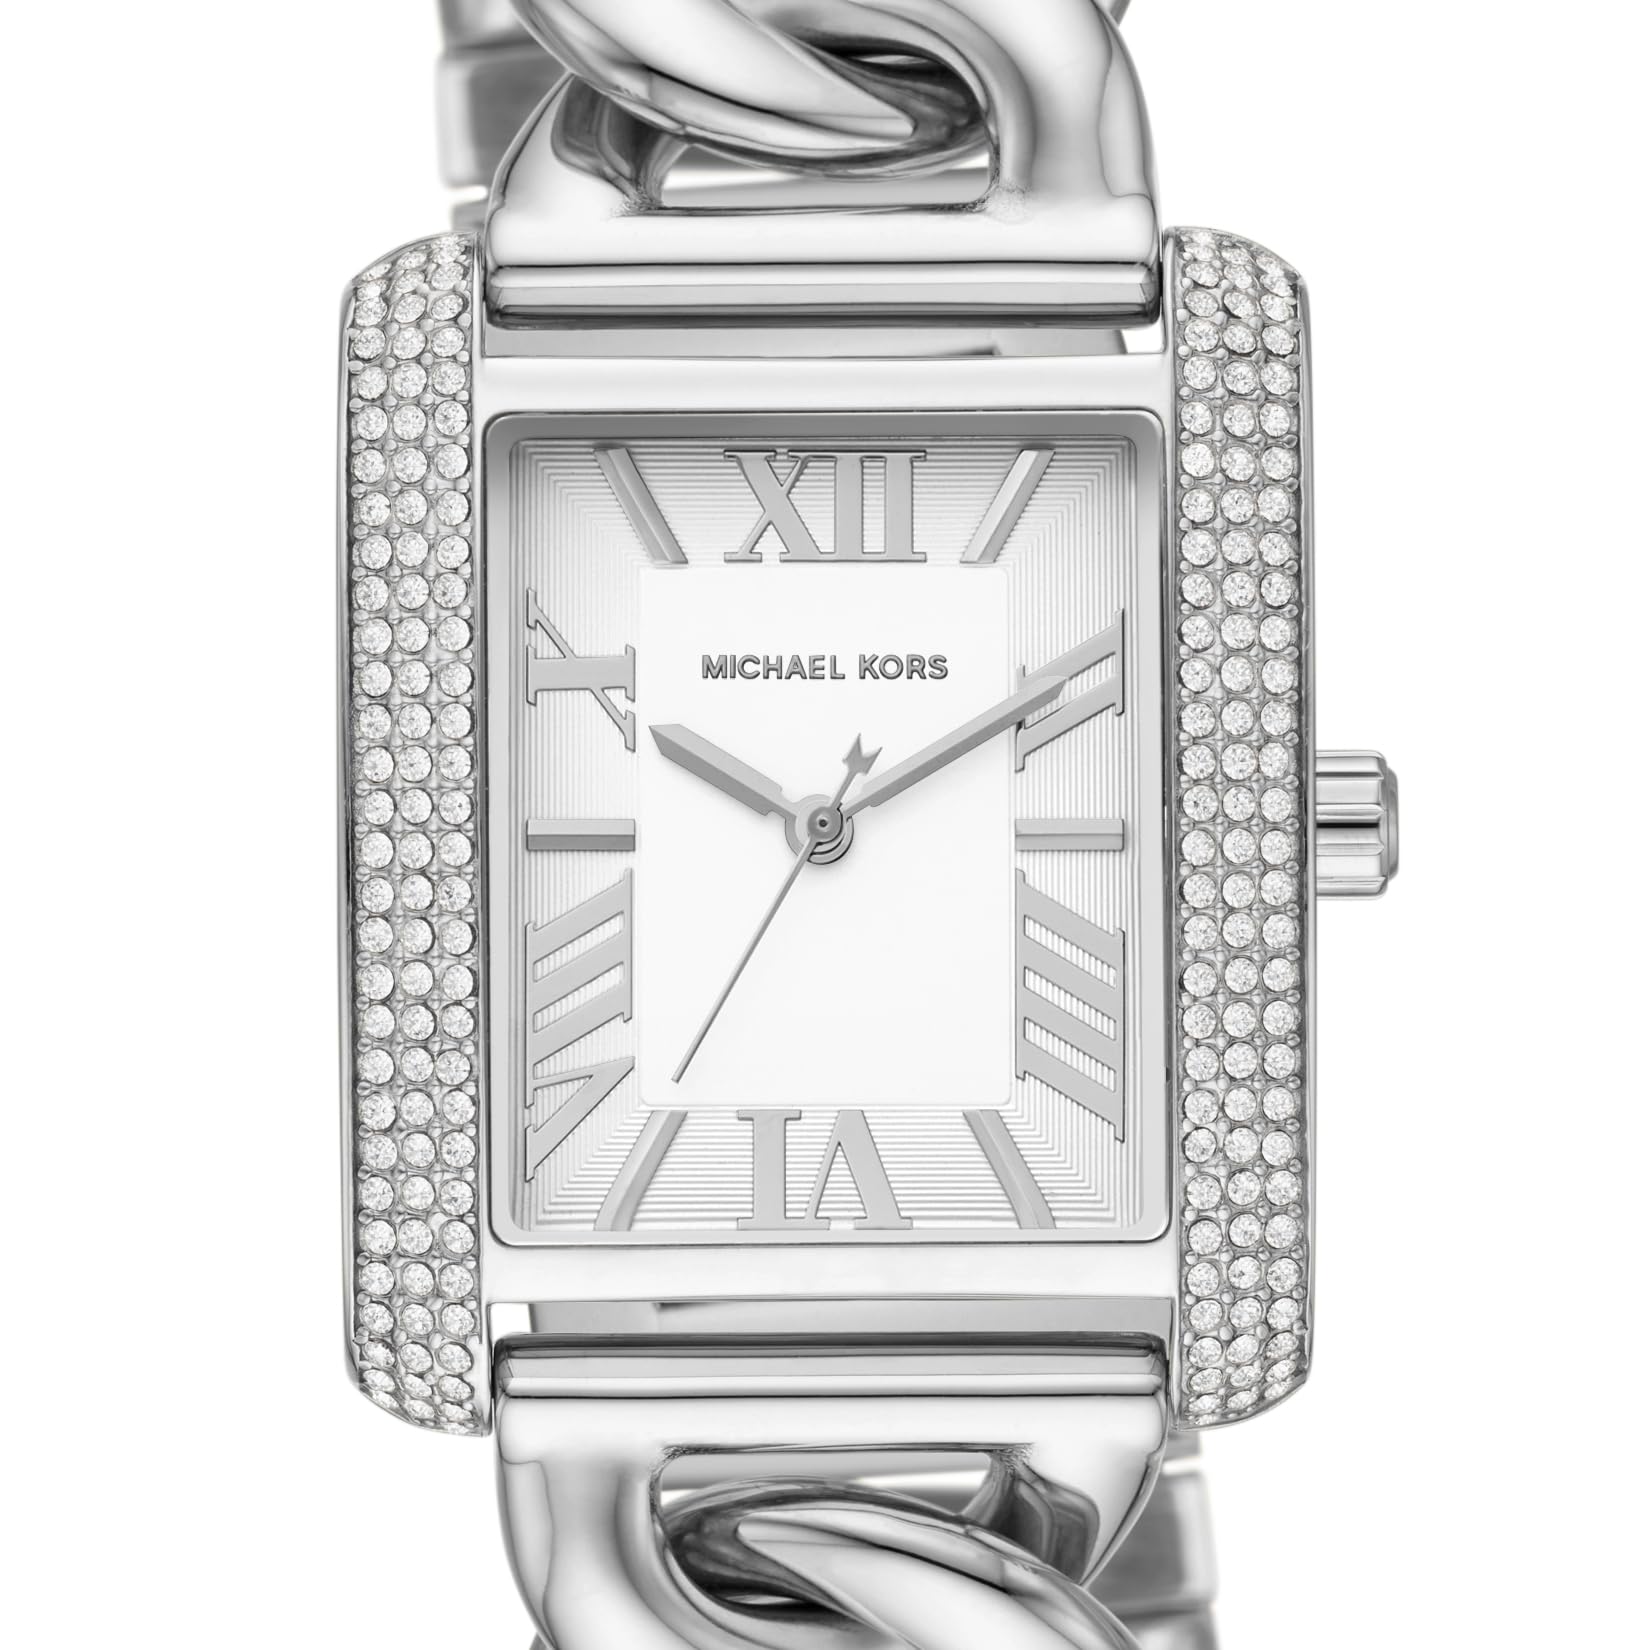 Michael Kors Emery Women's Watch, Rectangular Stainless Steel Watch for Women with Steel or Leather Band